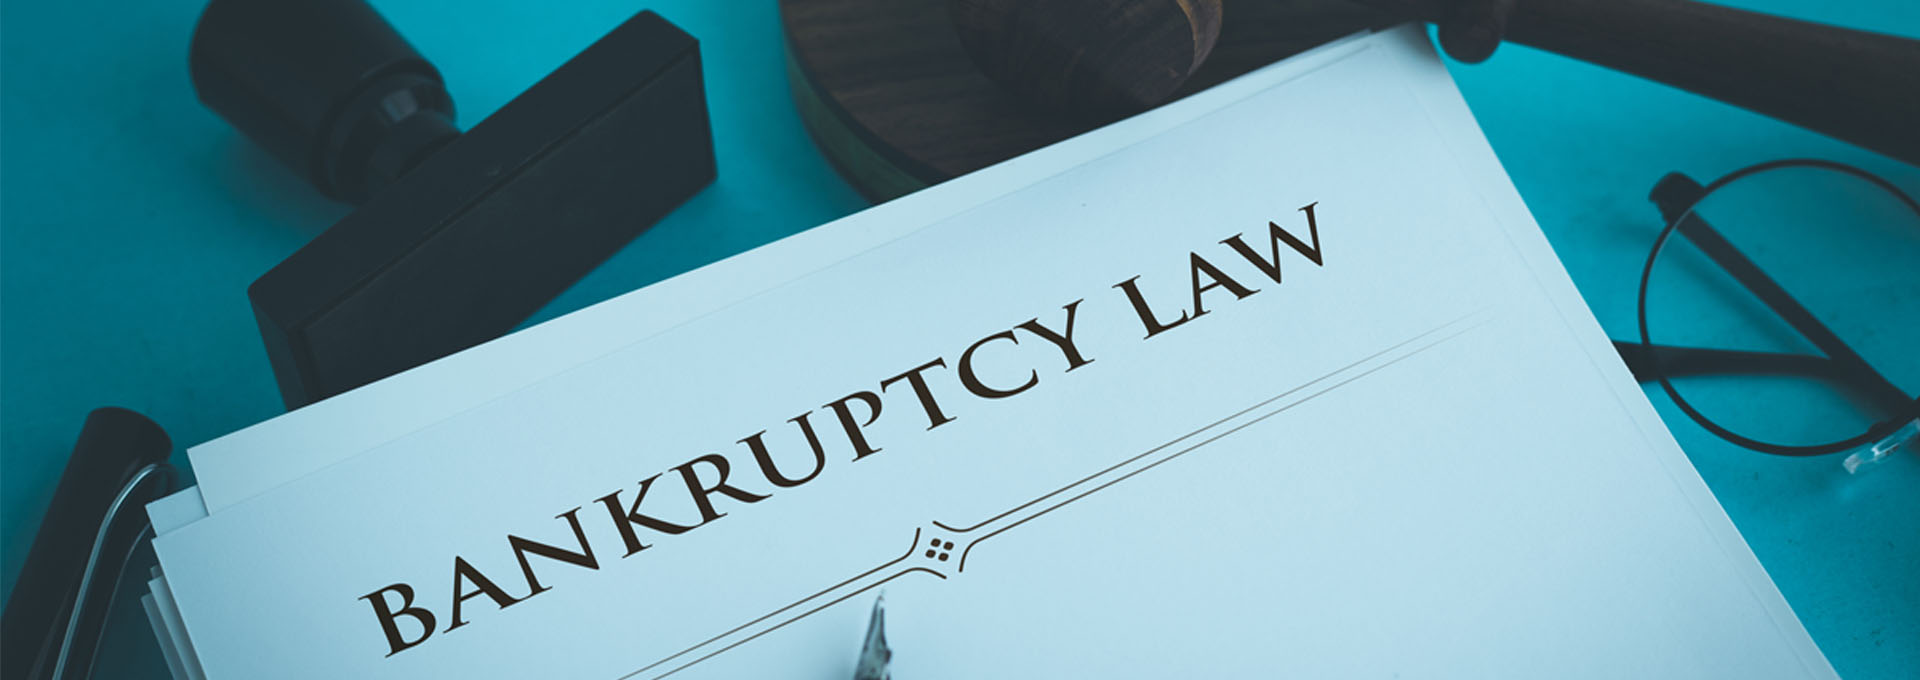 Bankruptcy Law Document 